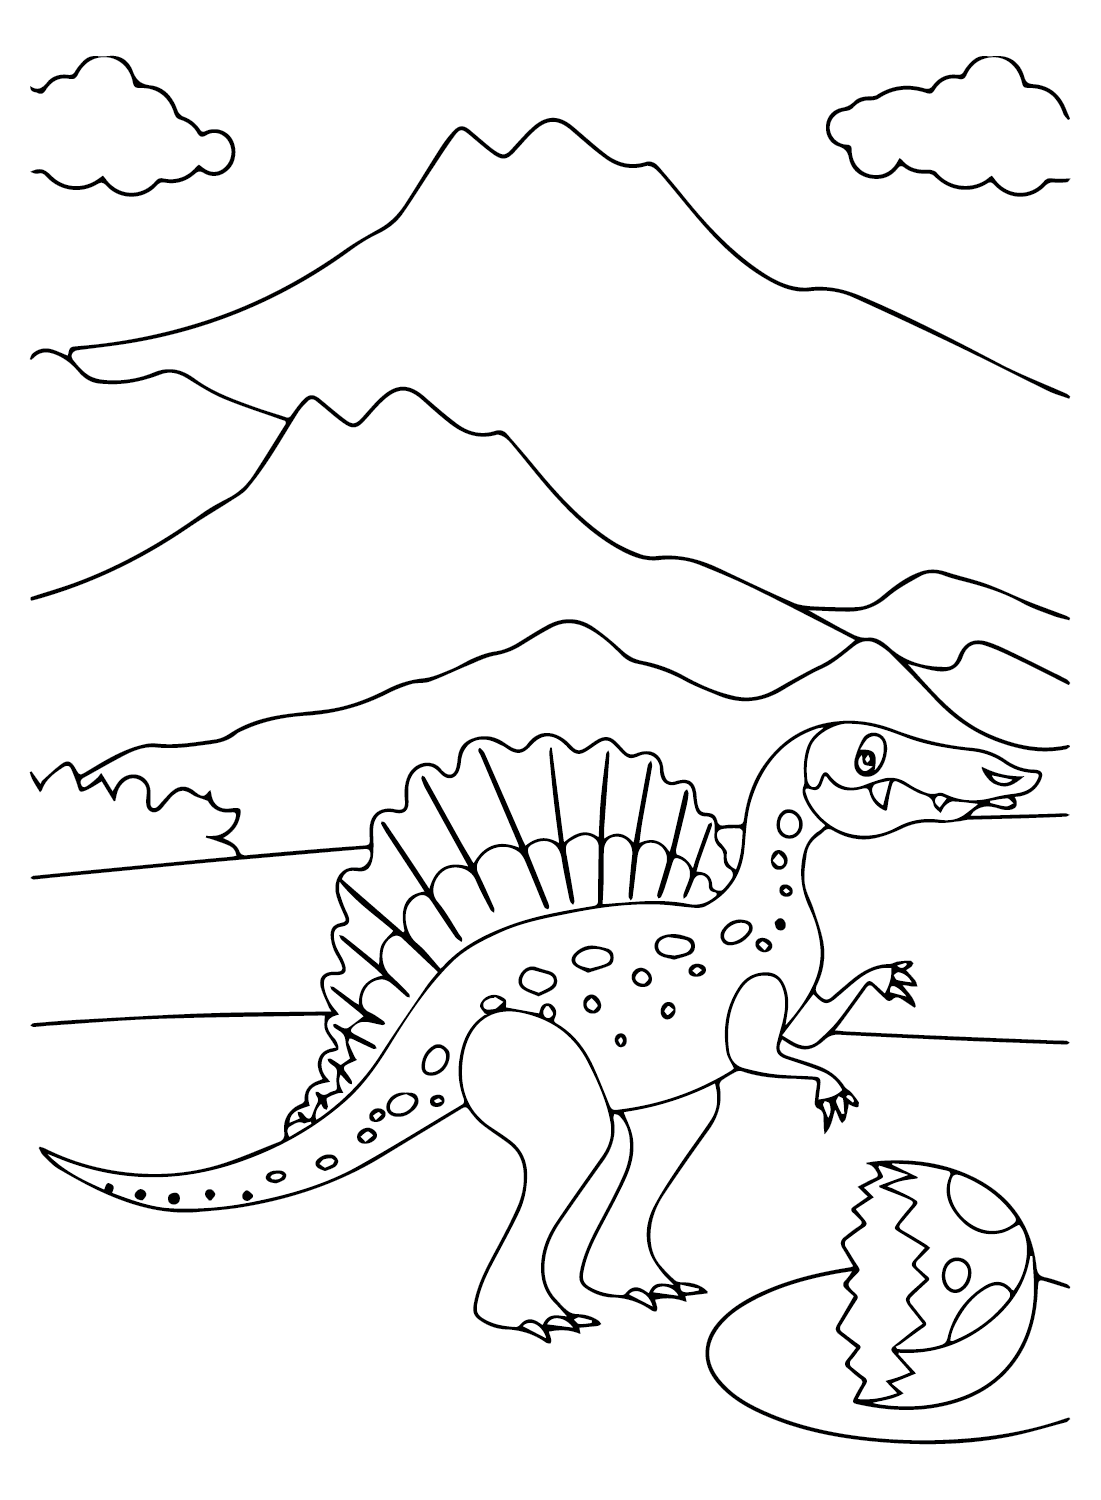 Spinosaurus Aegyptiacus Coloring Pages to for Kids